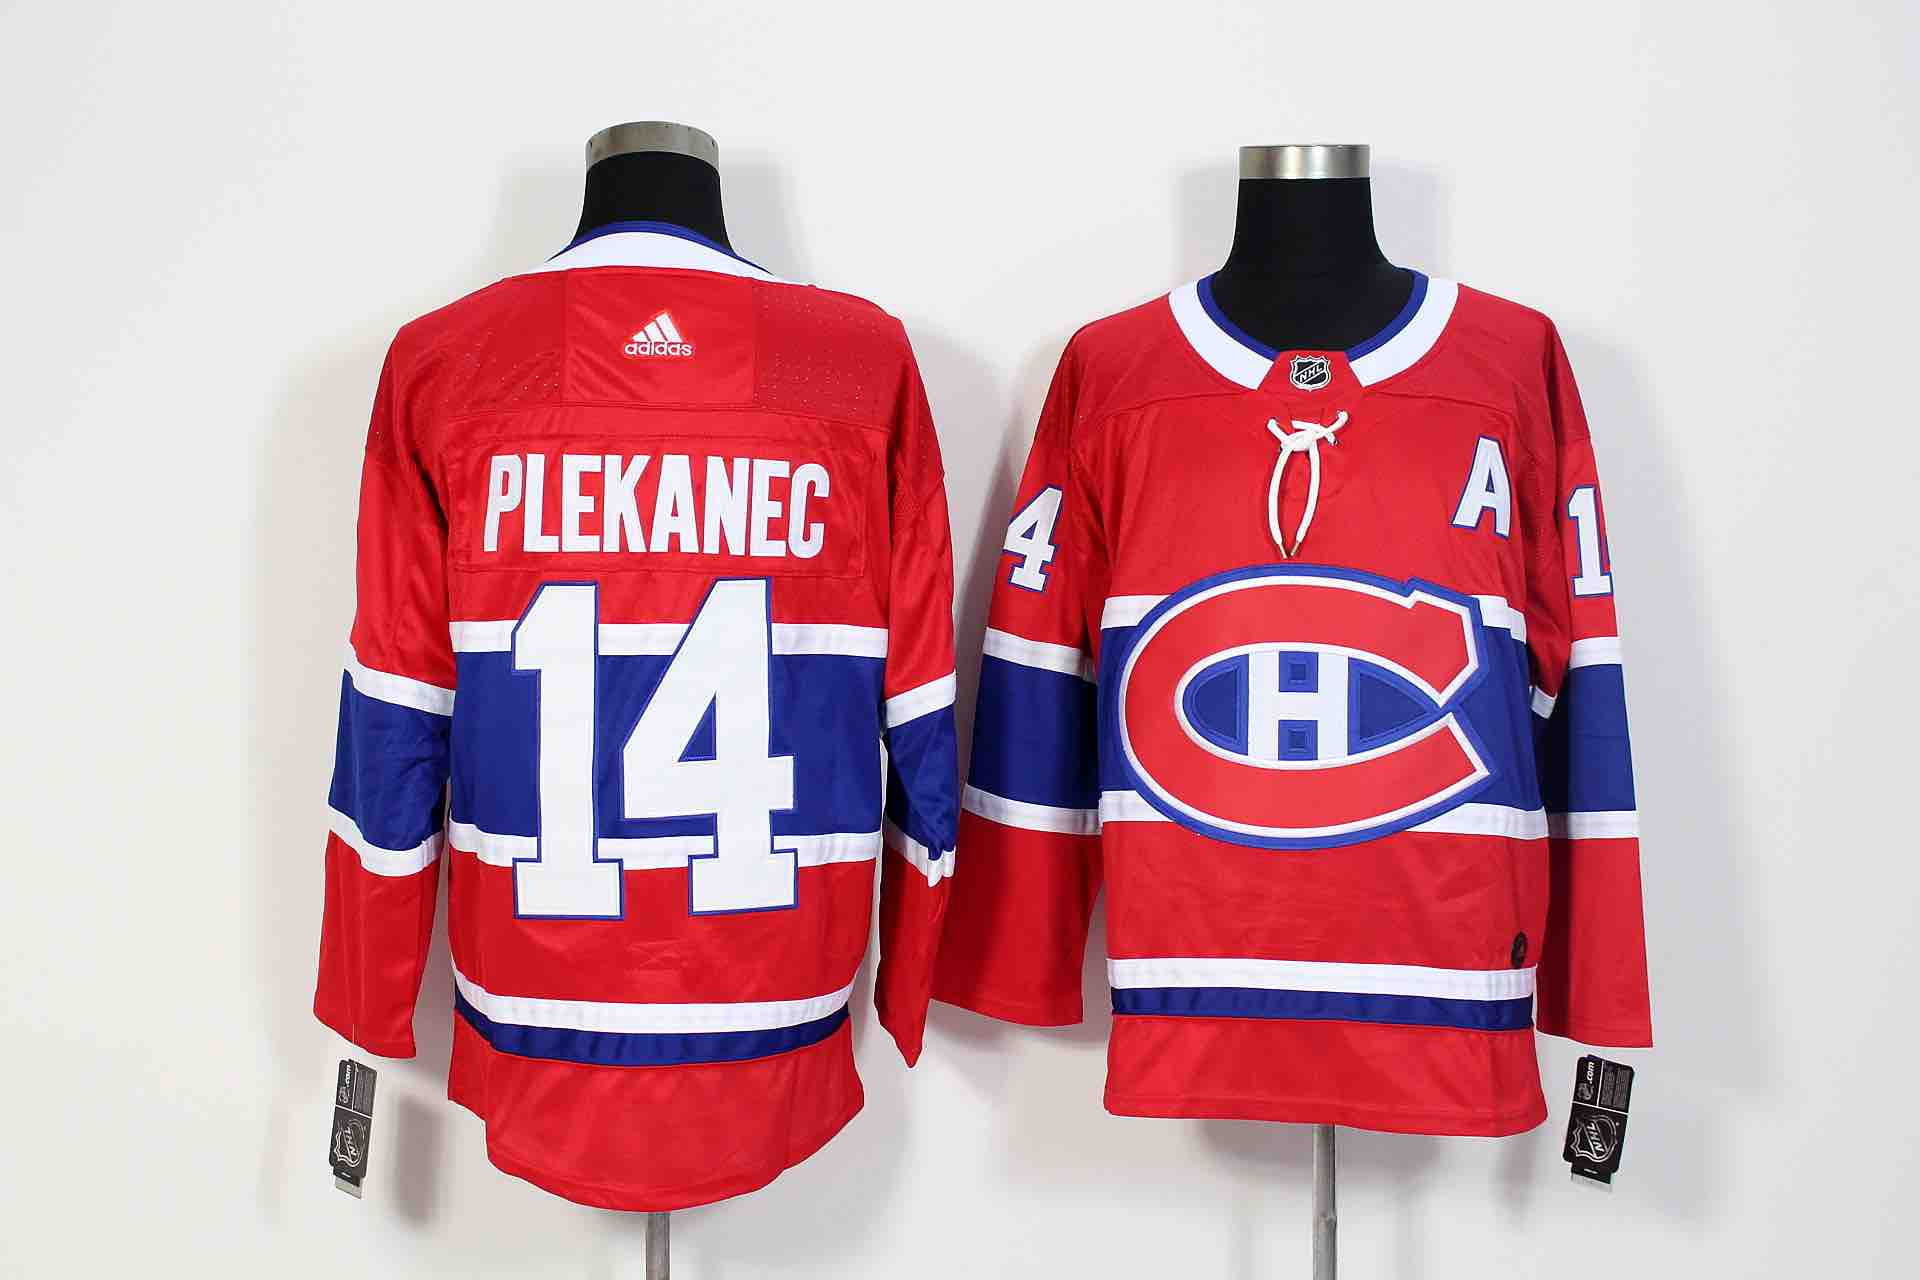 Adidas NHL Montreal Canadiens #14 Plekanec Red Jersey